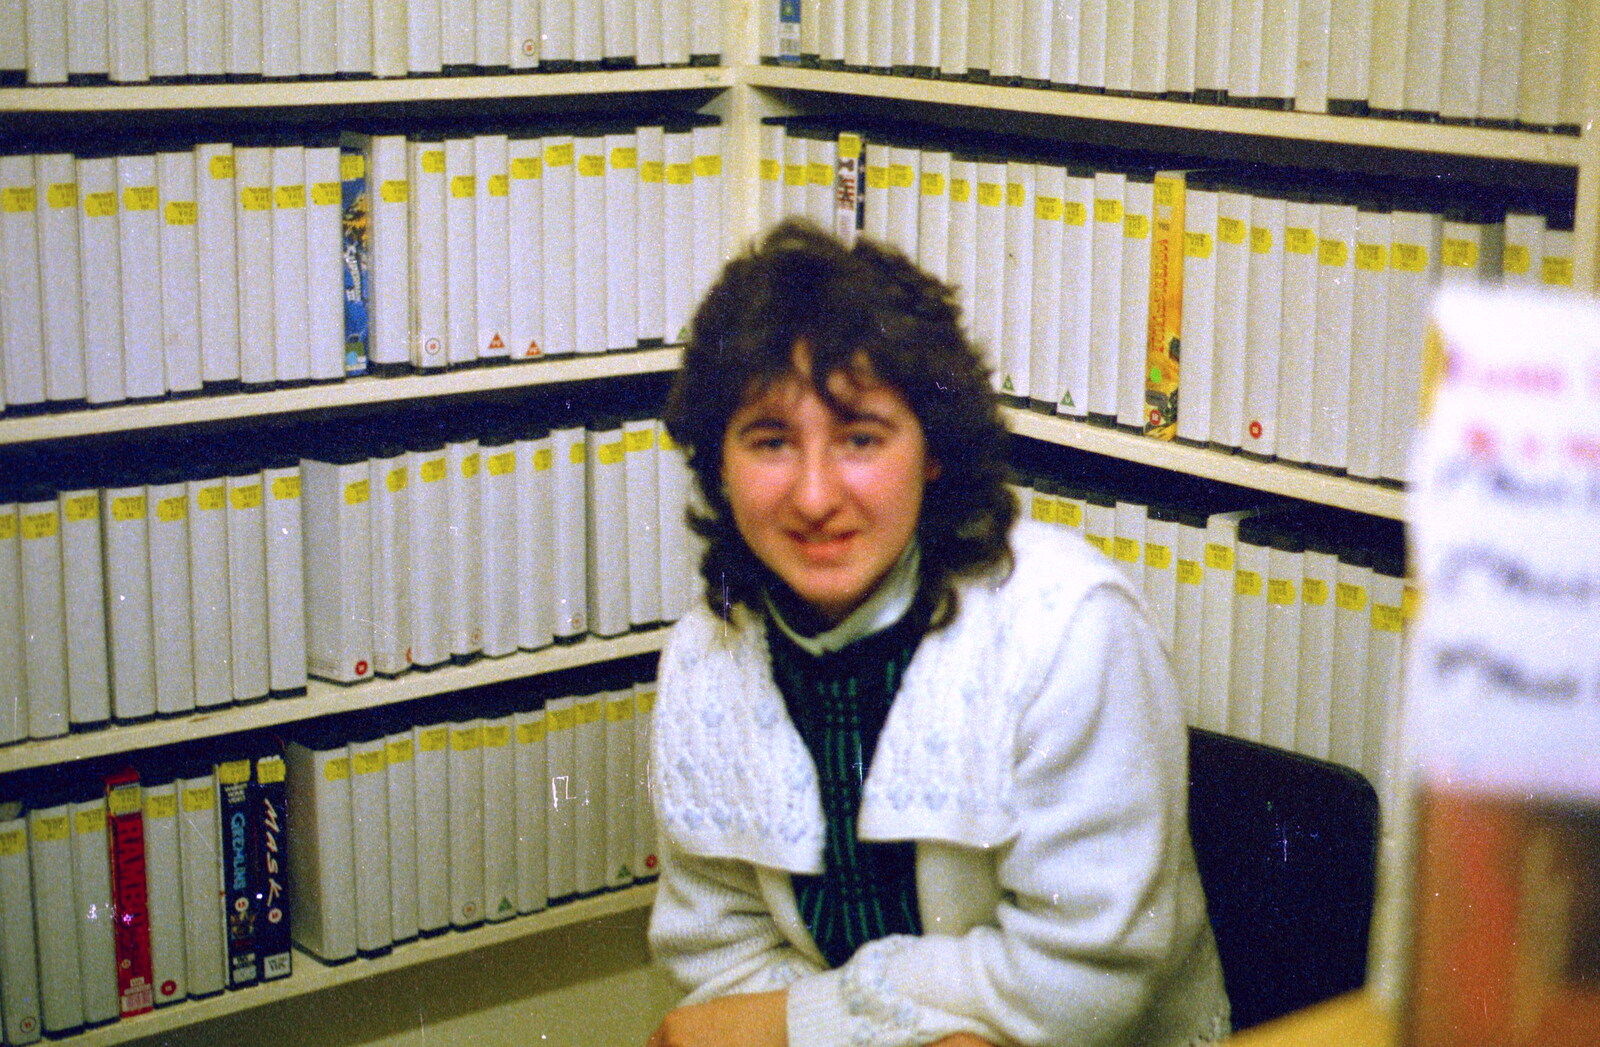 An old school friend in a New Milton video shop from Uni: The End of Term and Whitsand Bay, Plymouth and New Milton - 21st March 1986